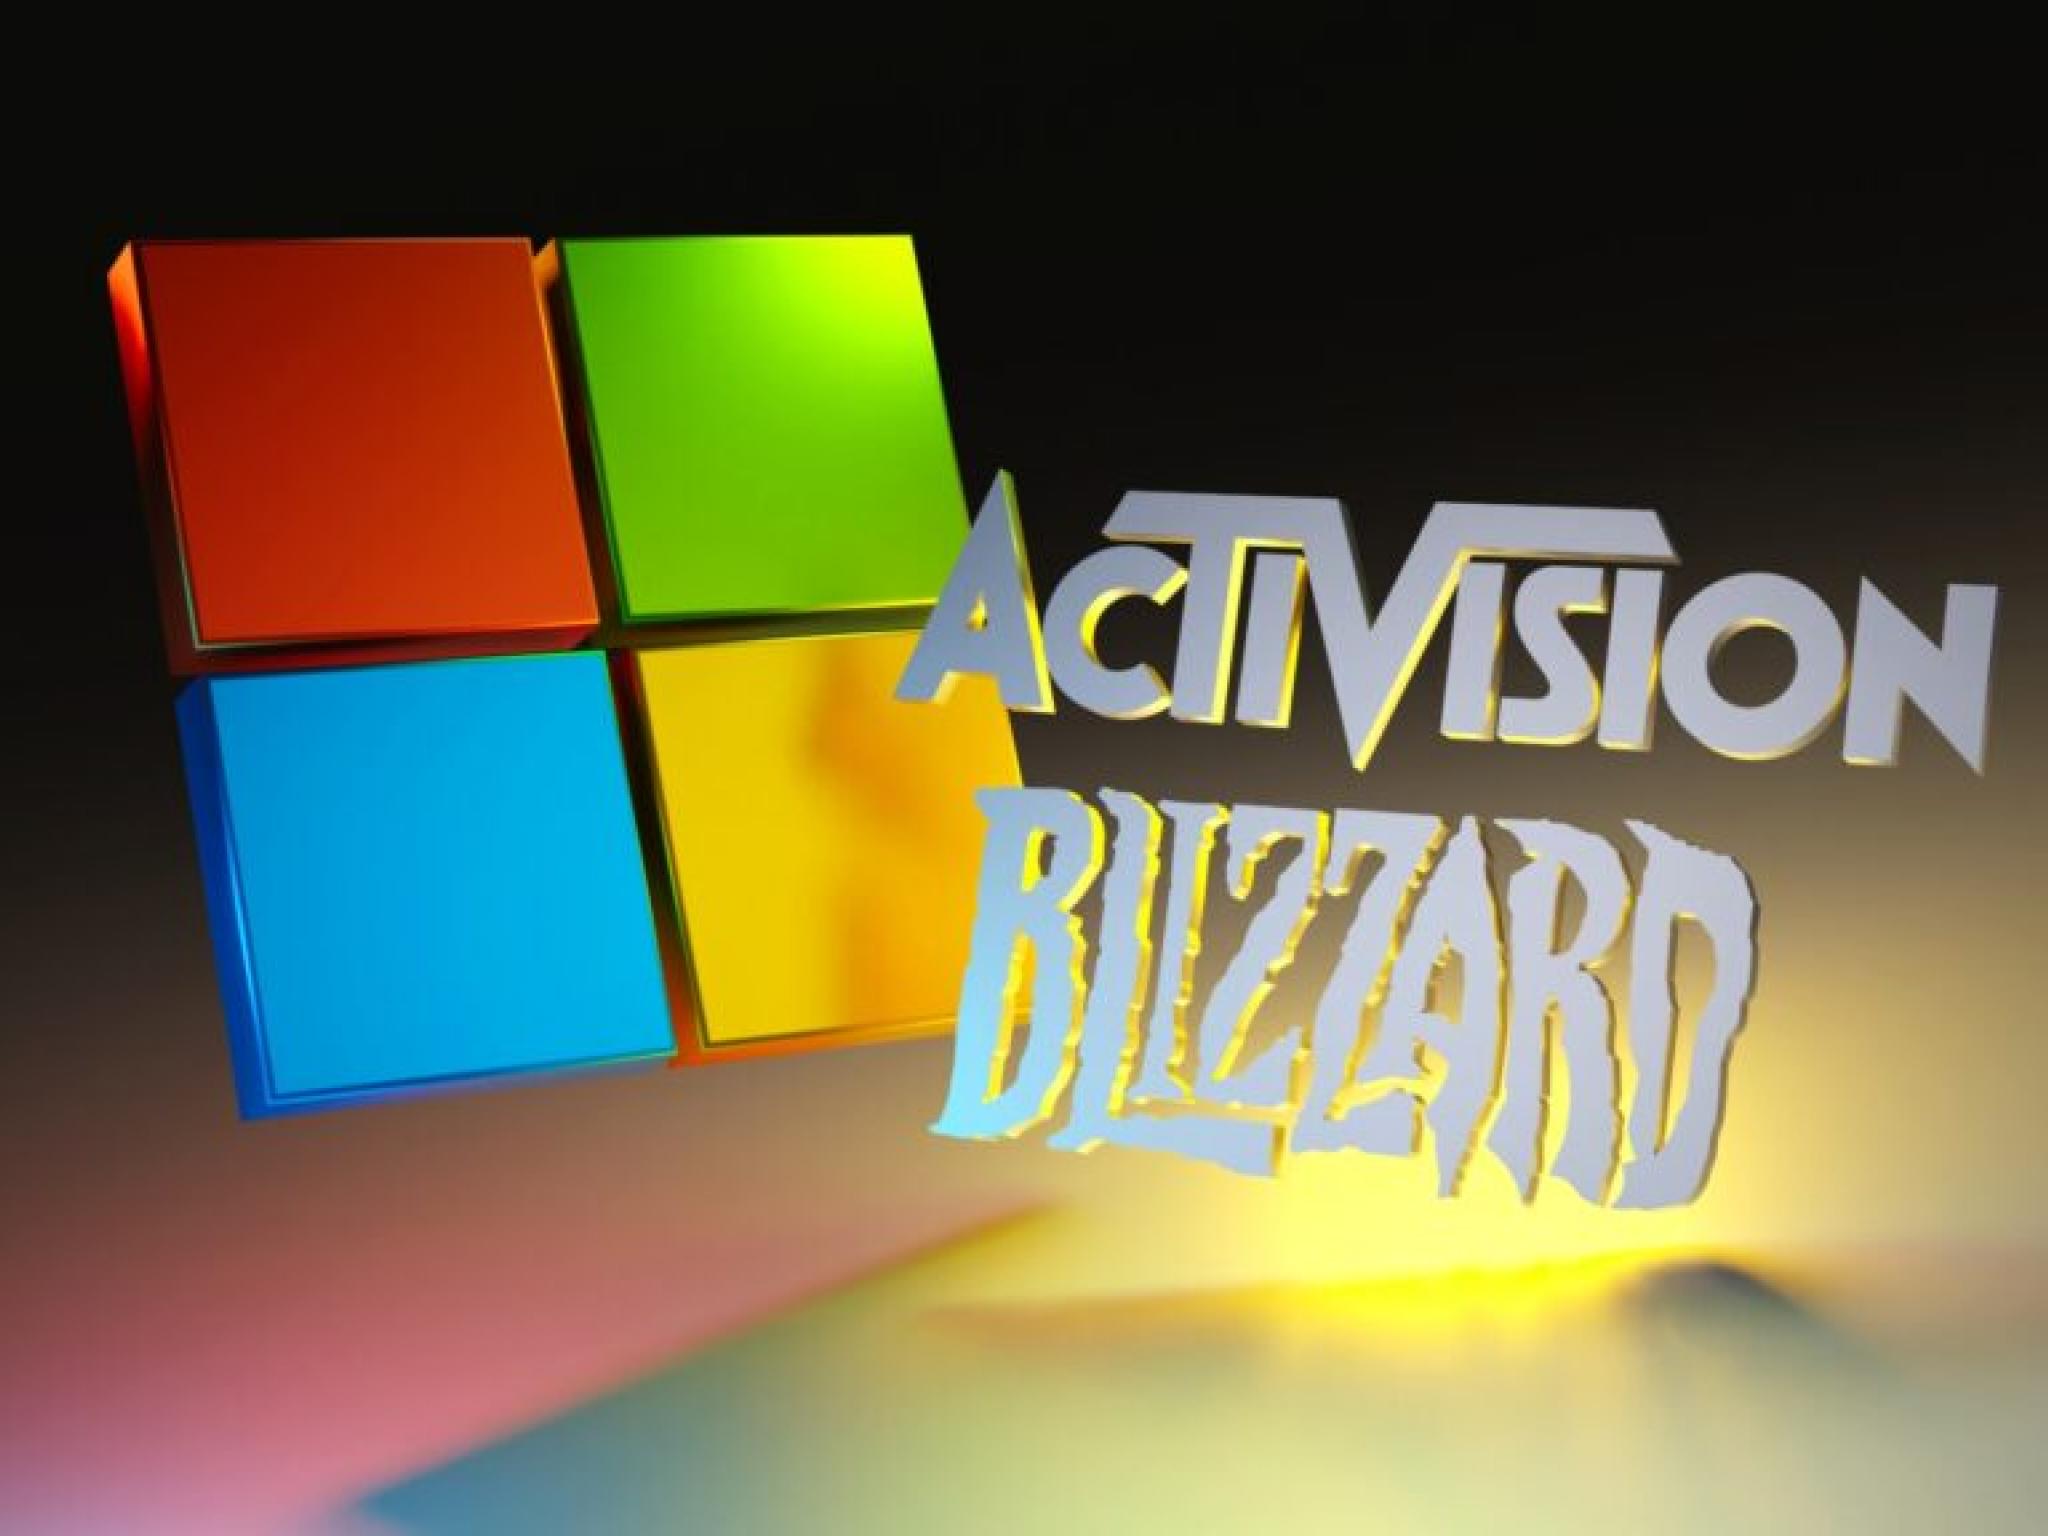  microsofts-gaming-powerhouse-grows-activision-blizzard-bought-for-69-billion 